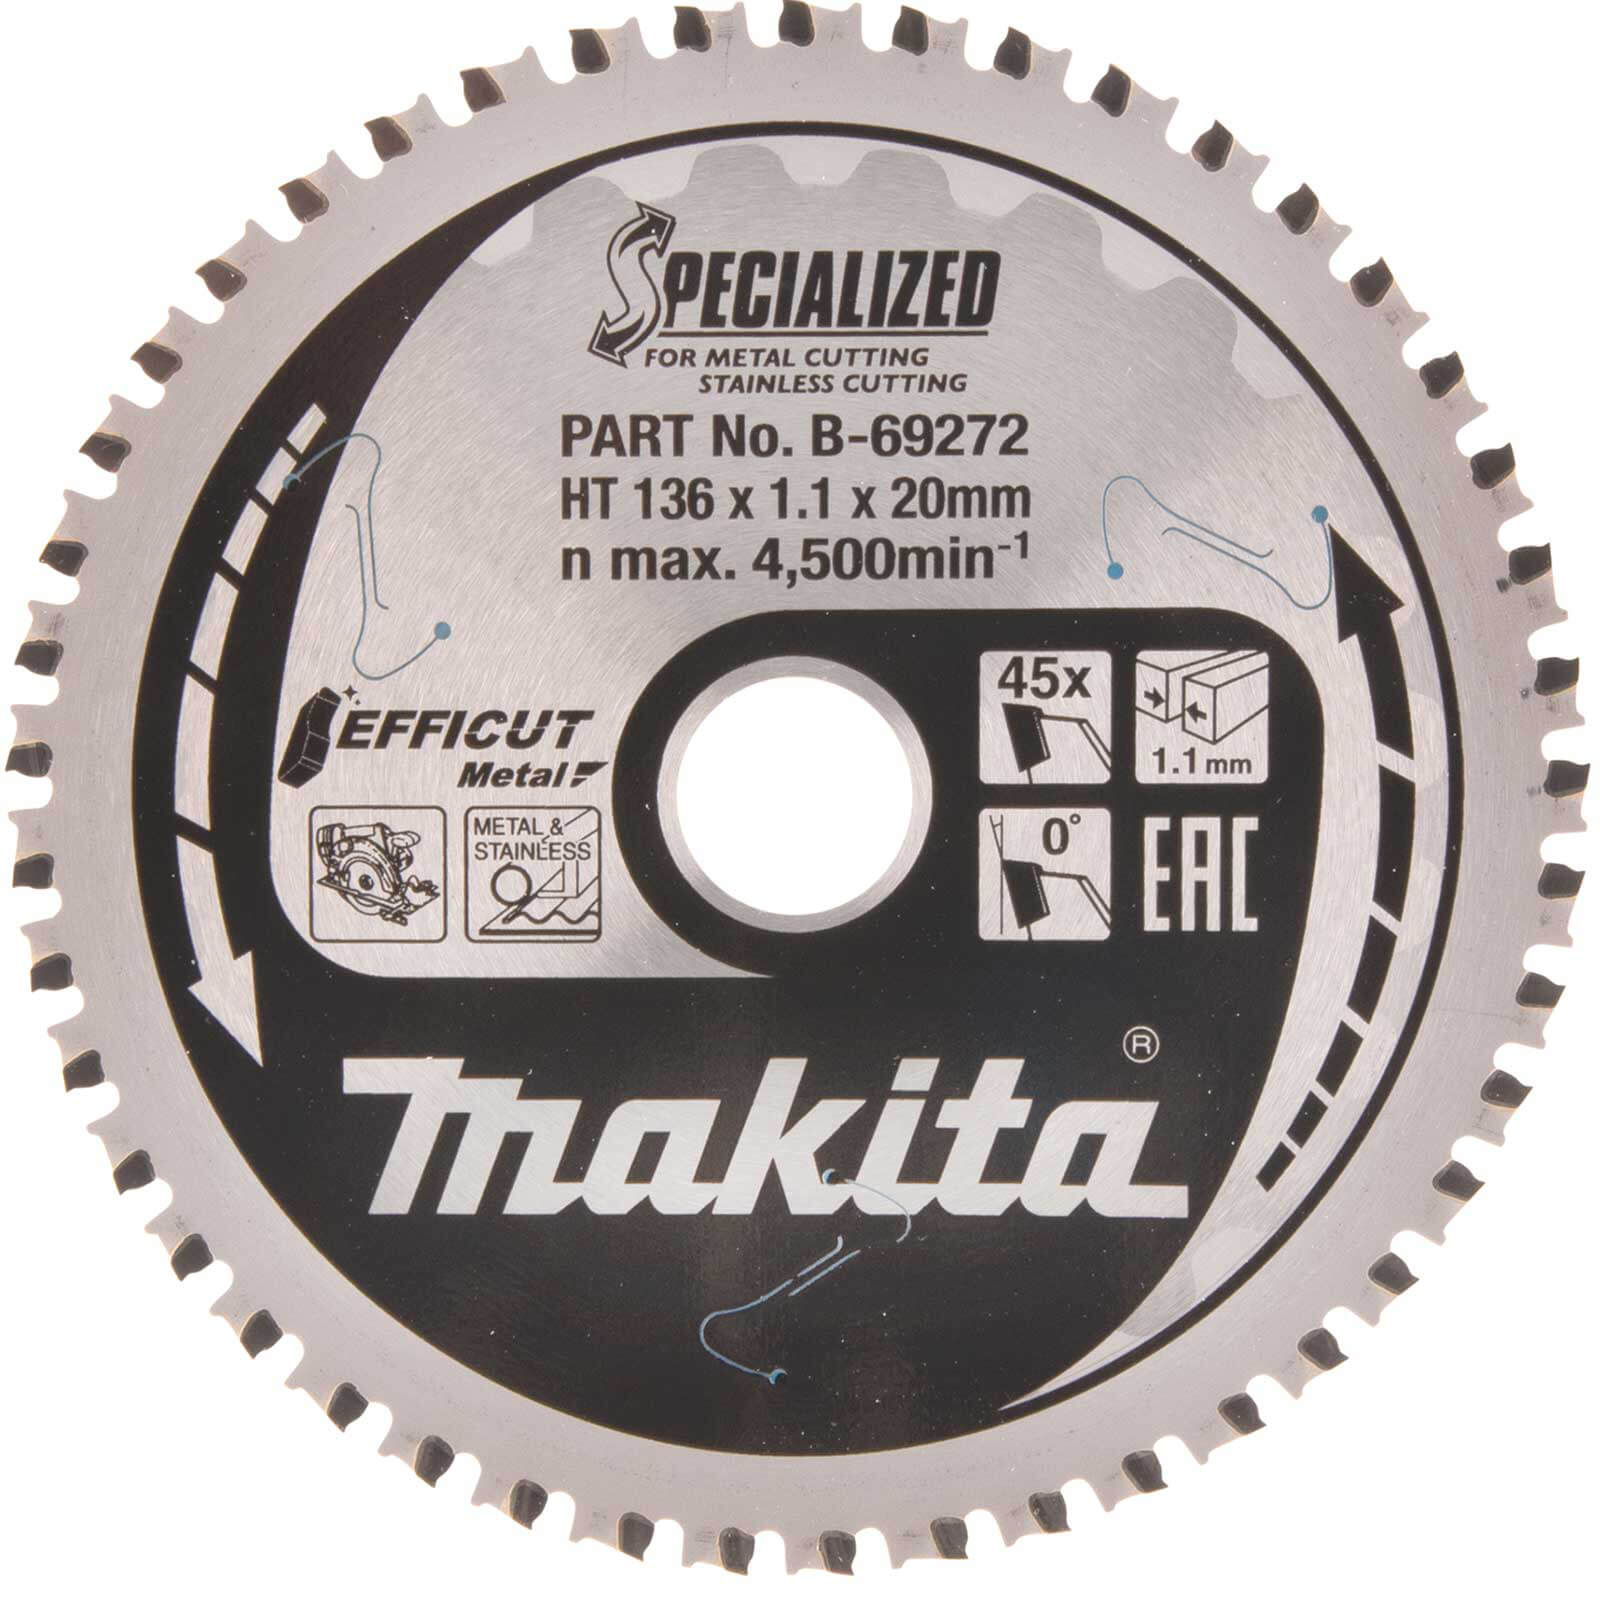 Photos - Power Tool Accessory Makita SPECIALIZED Efficut Stainless Circular Saw Blade 150mm 48T 20mm B-6 